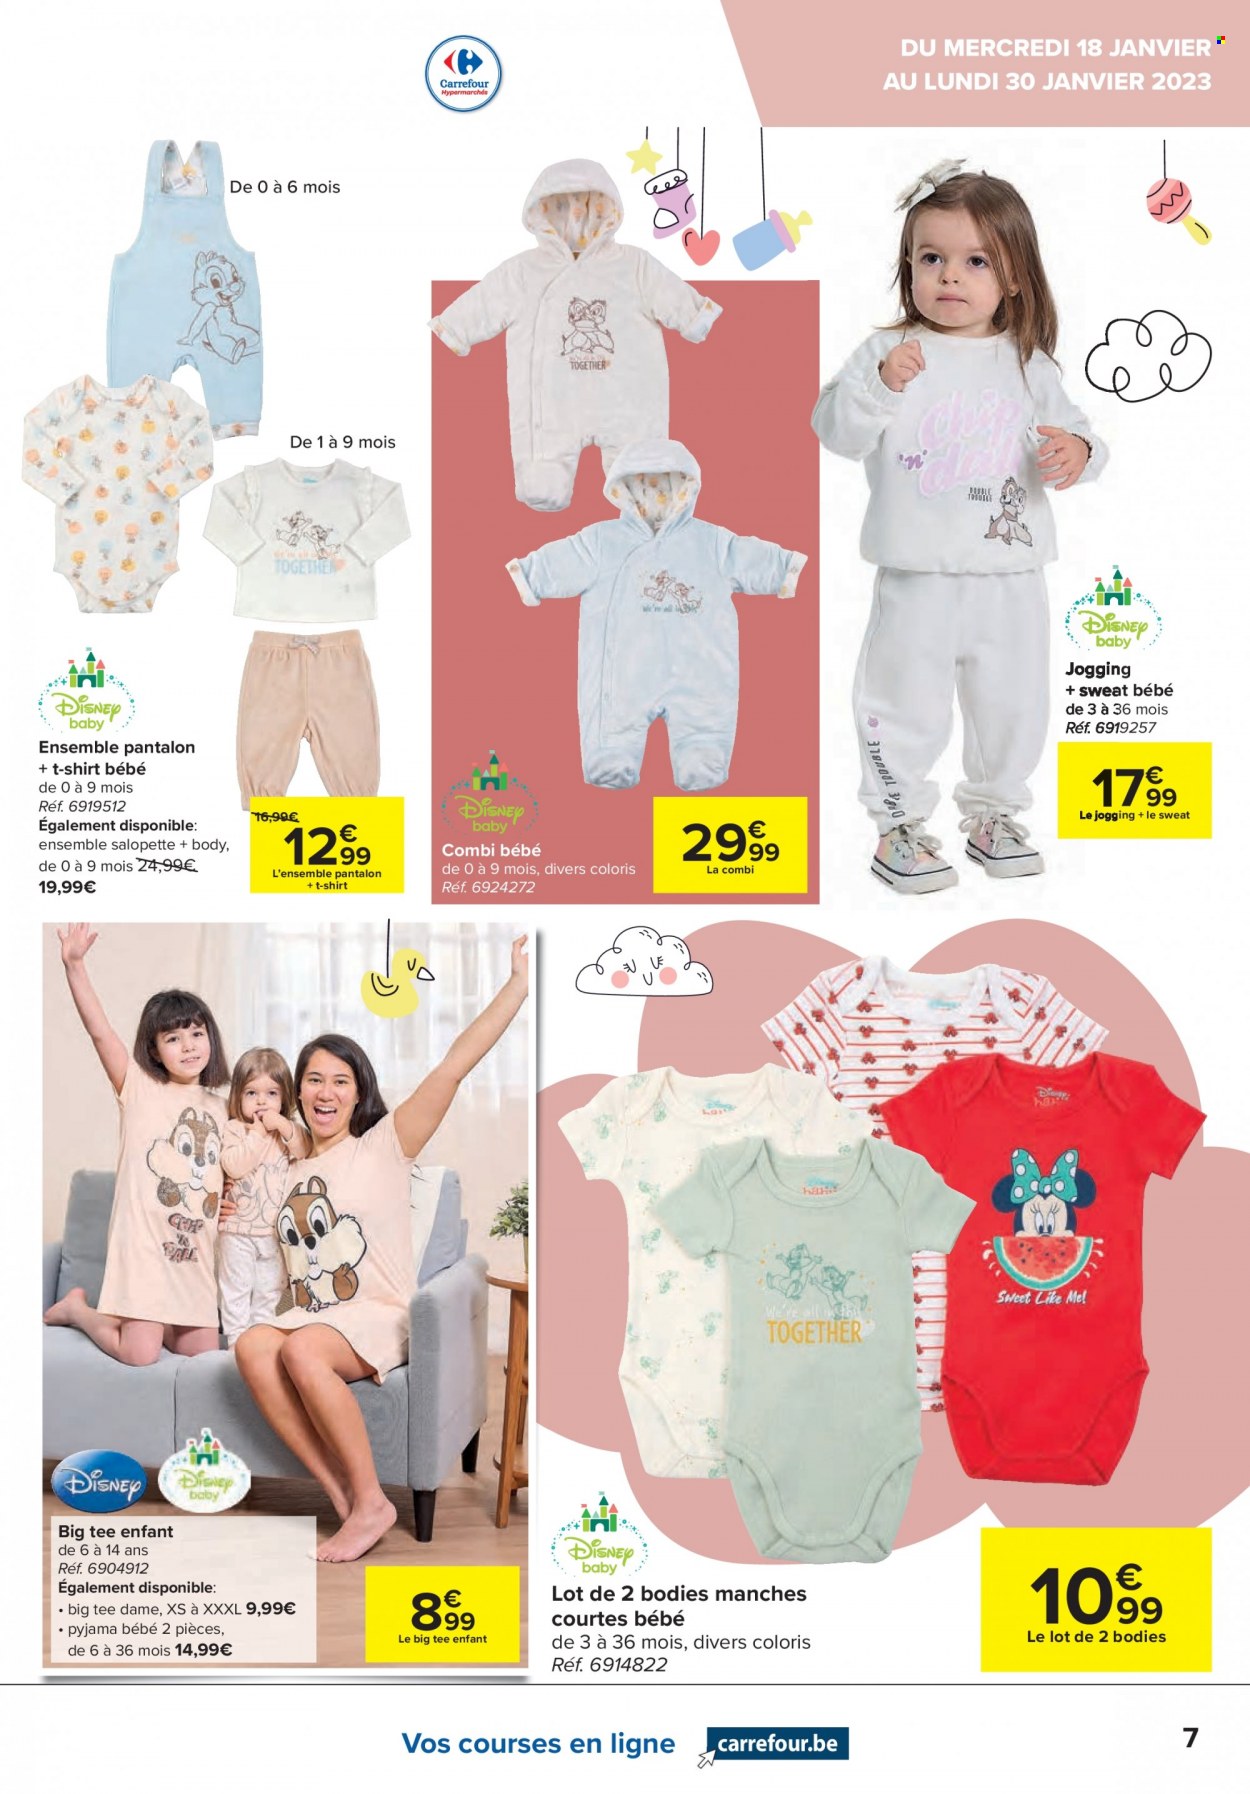 Catalogue Carrefour hypermarkt - 18.1.2023 - 30.1.2023. Page 7.